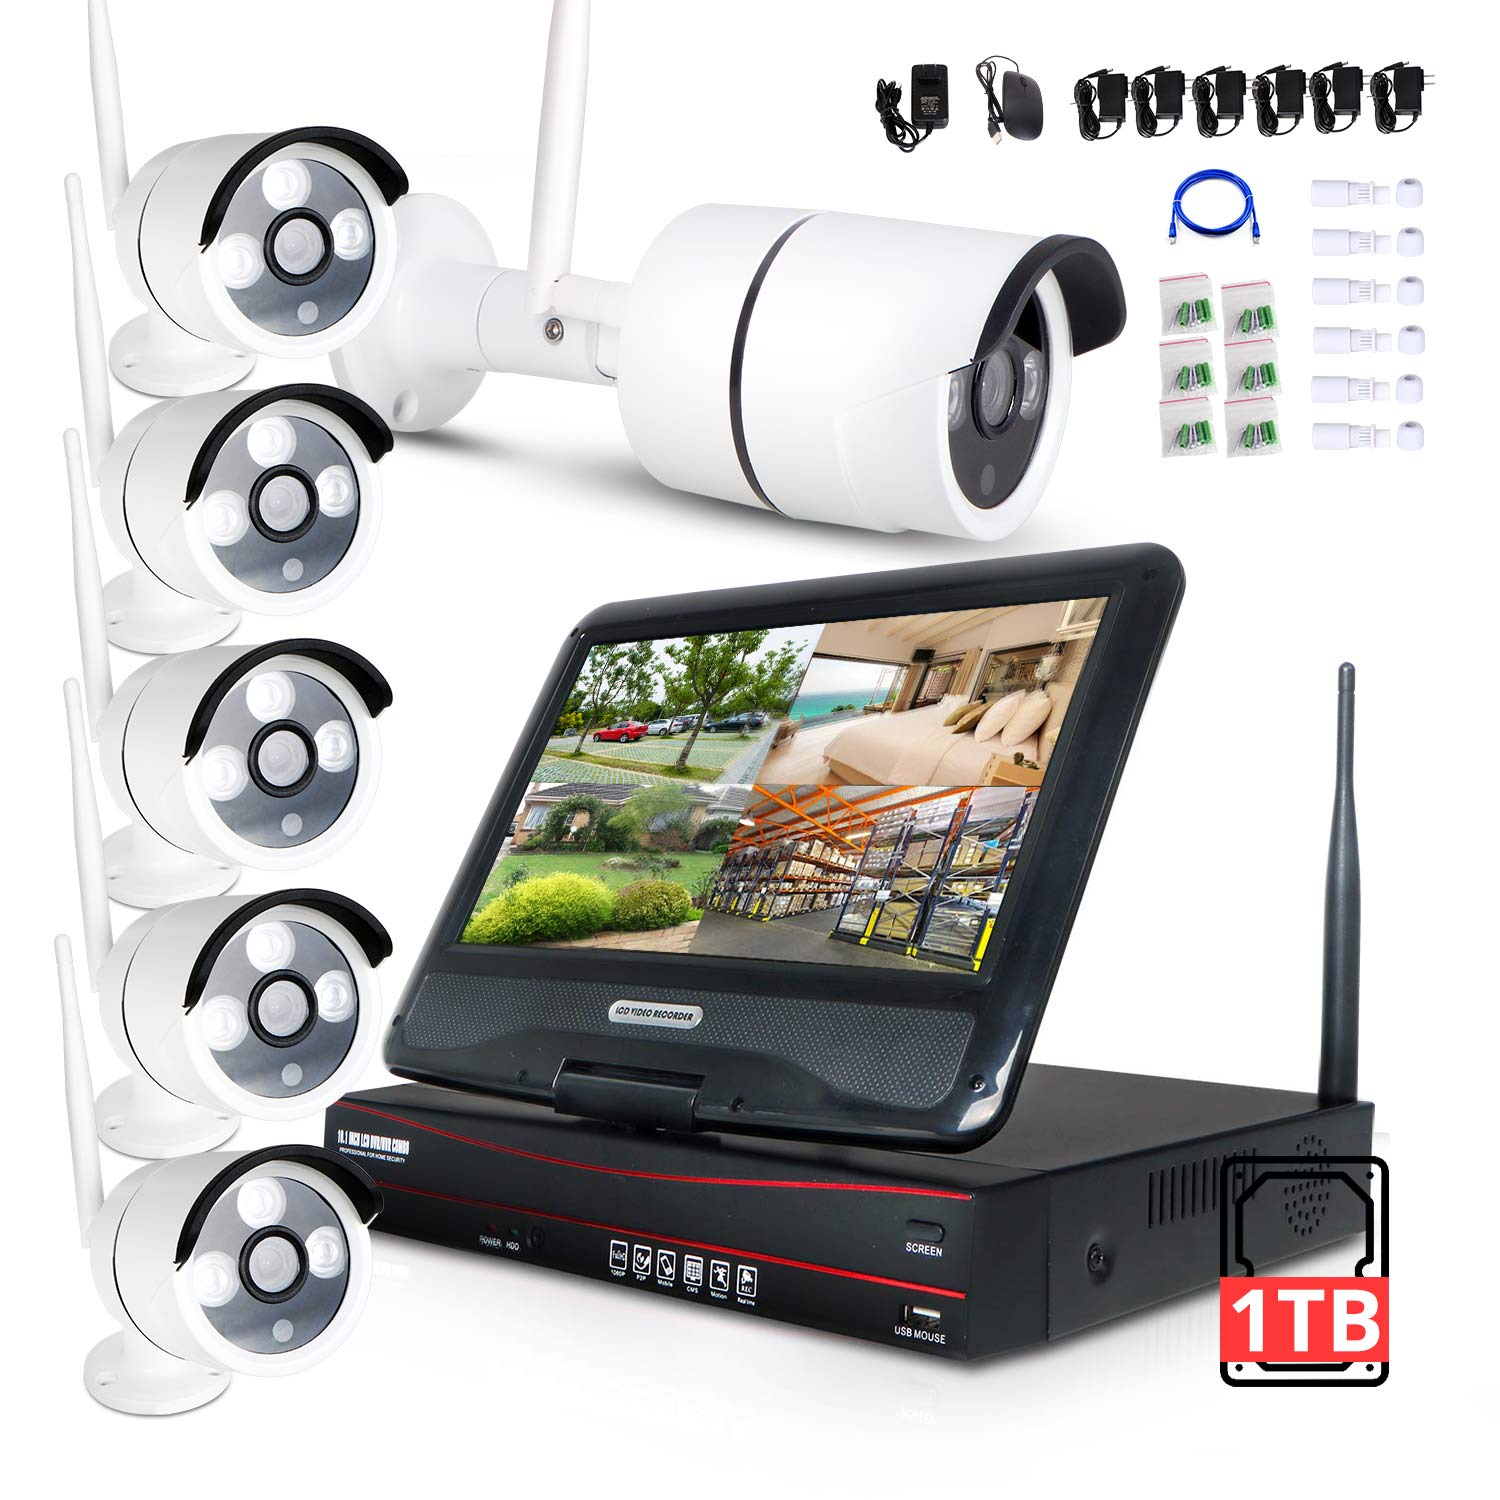 6 Camera Wireless Home CCTV Security System 720P HD ...